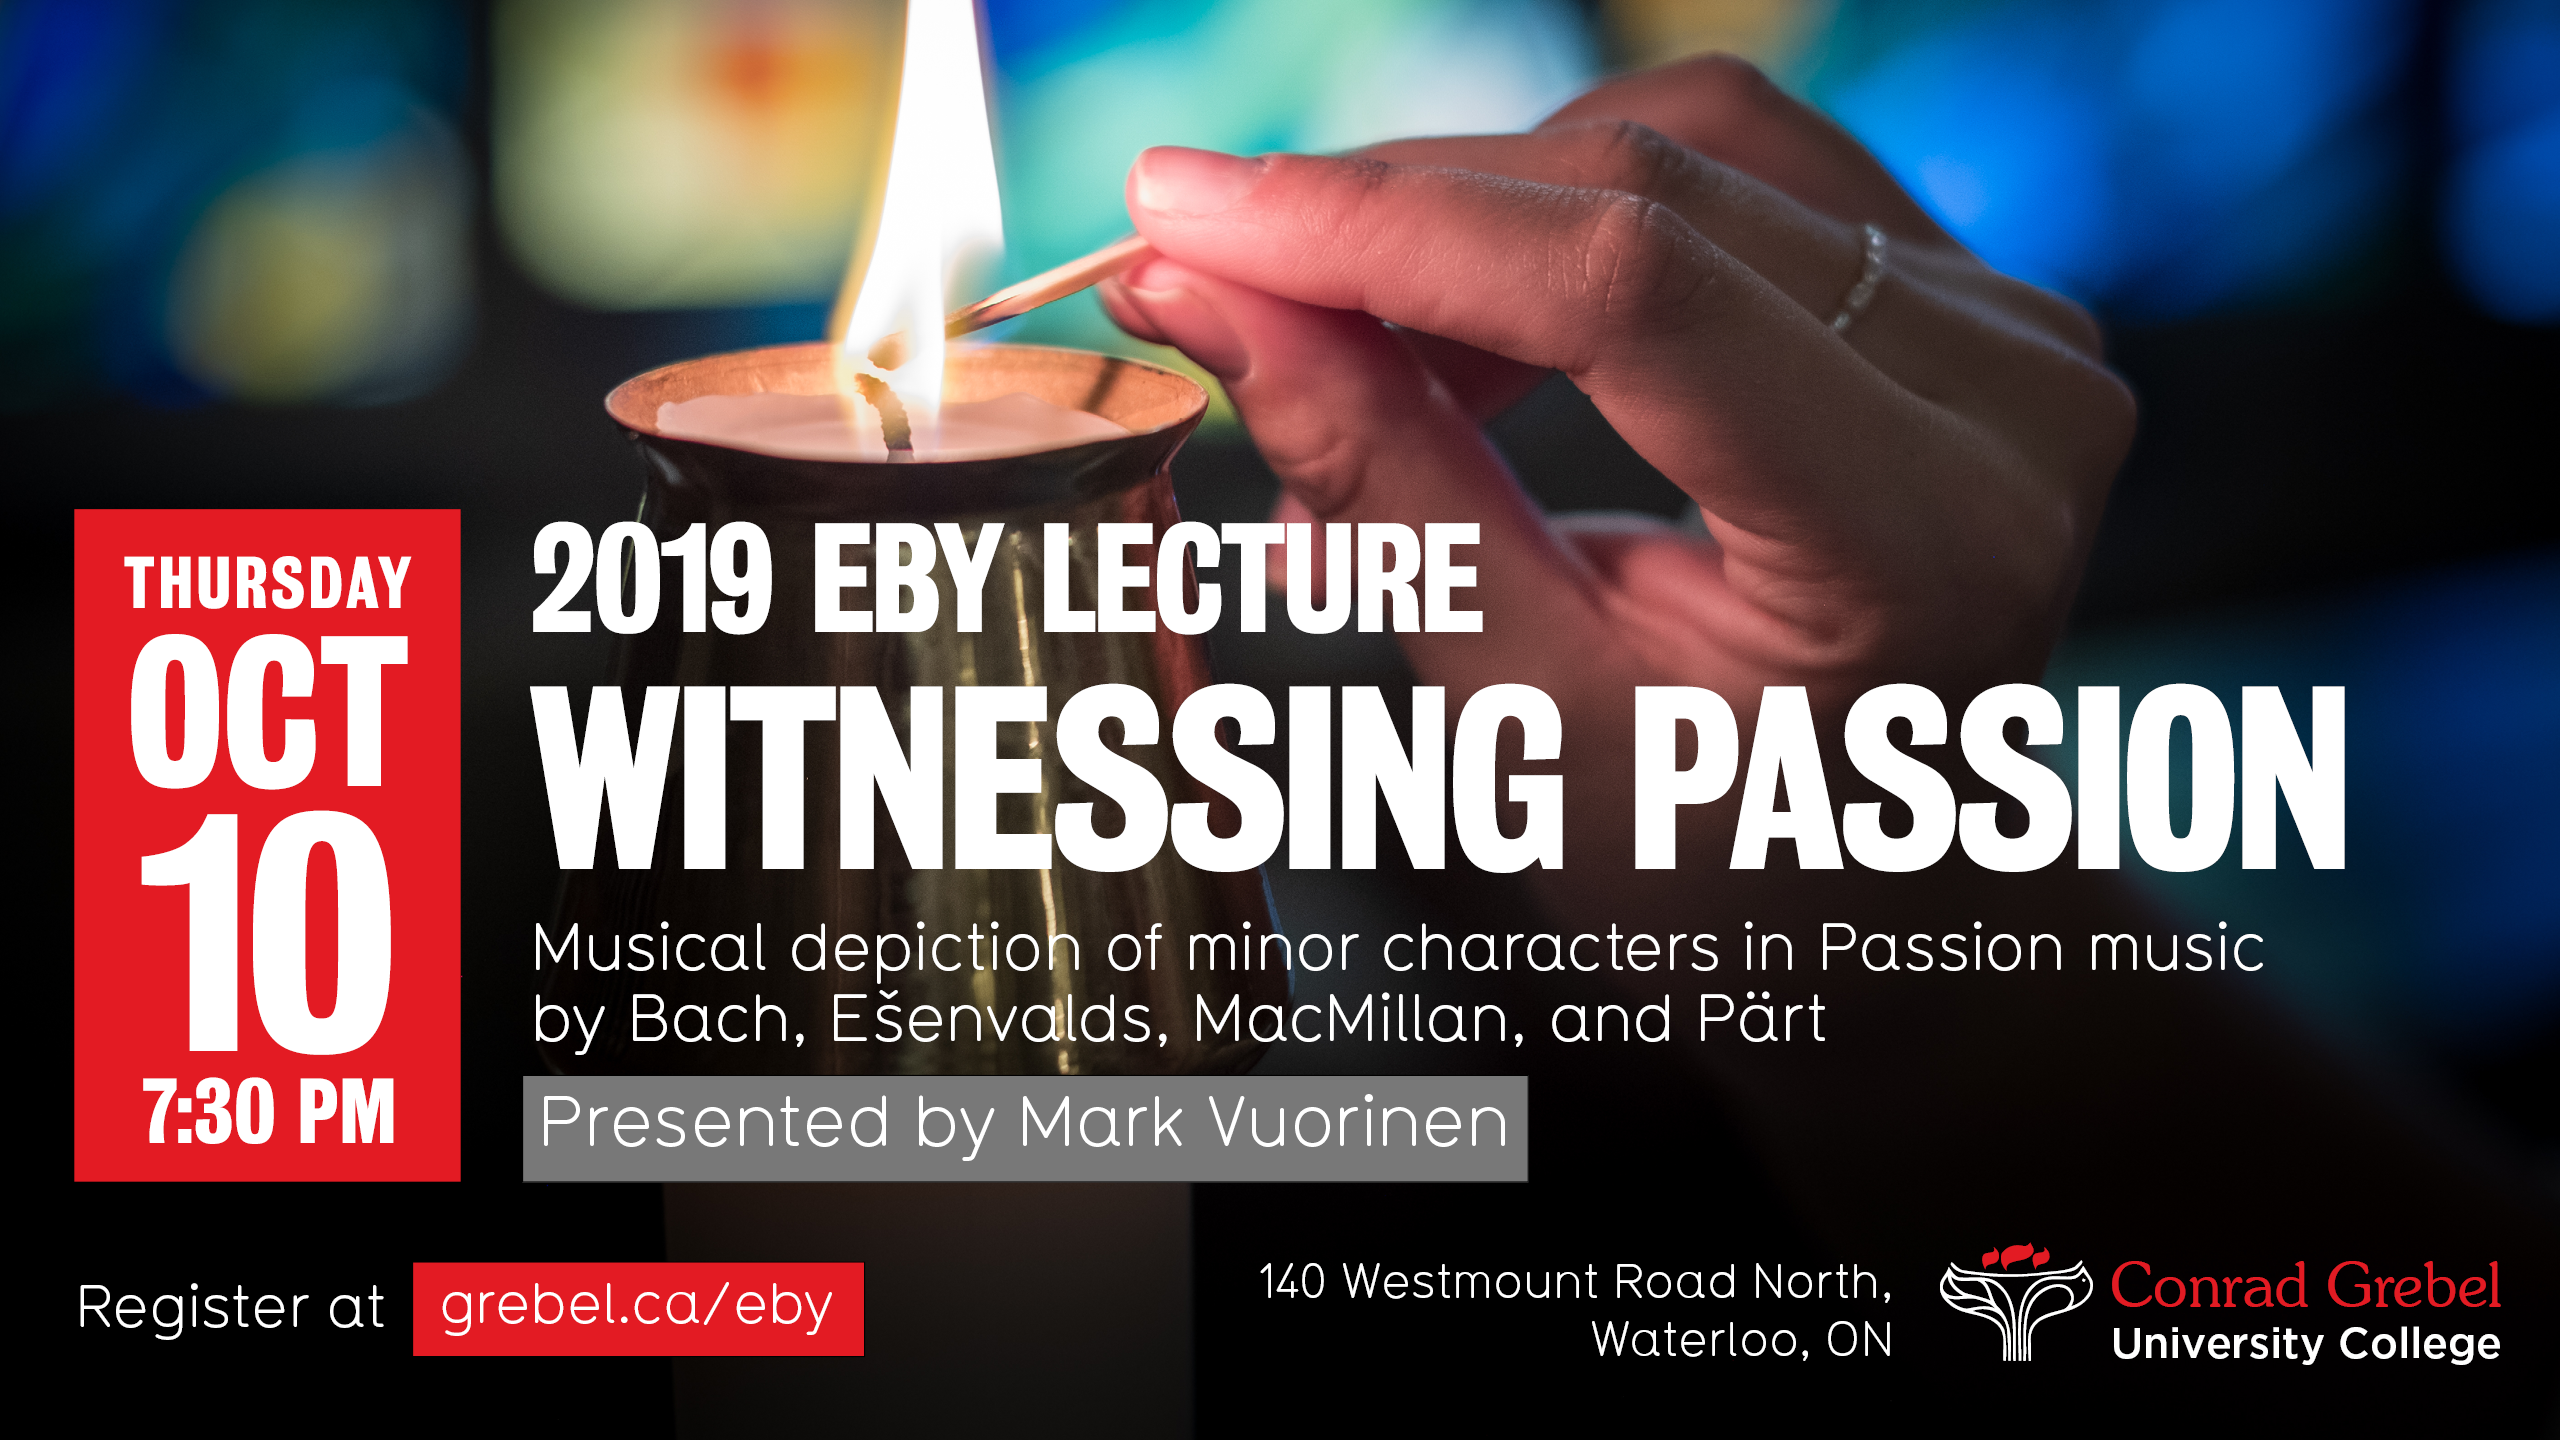 eby lecture, October 10, 2019, 7:30 pm at Grebel